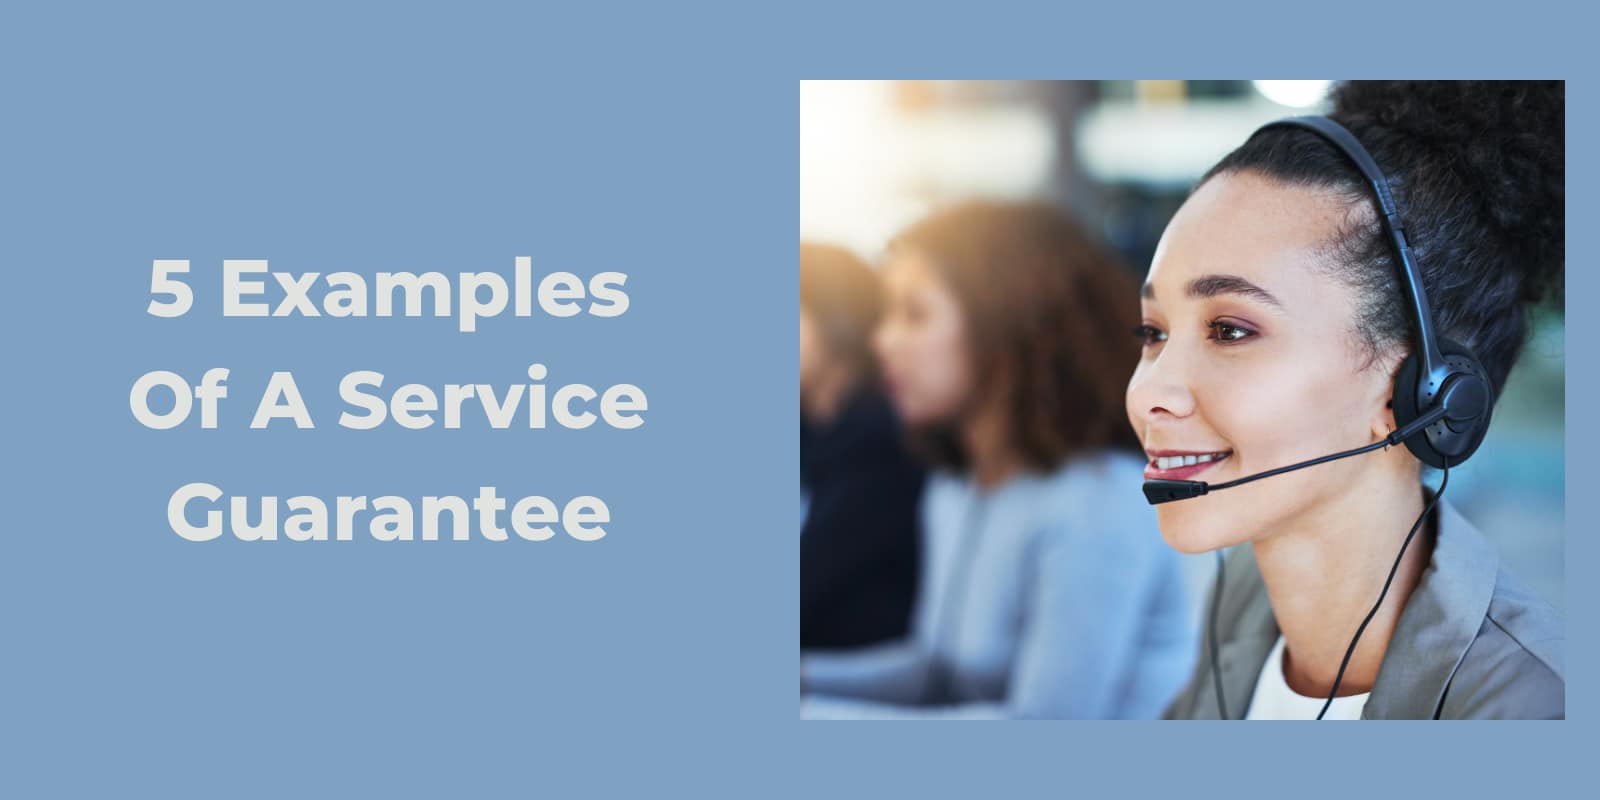 5 Examples of a Service Guarantee